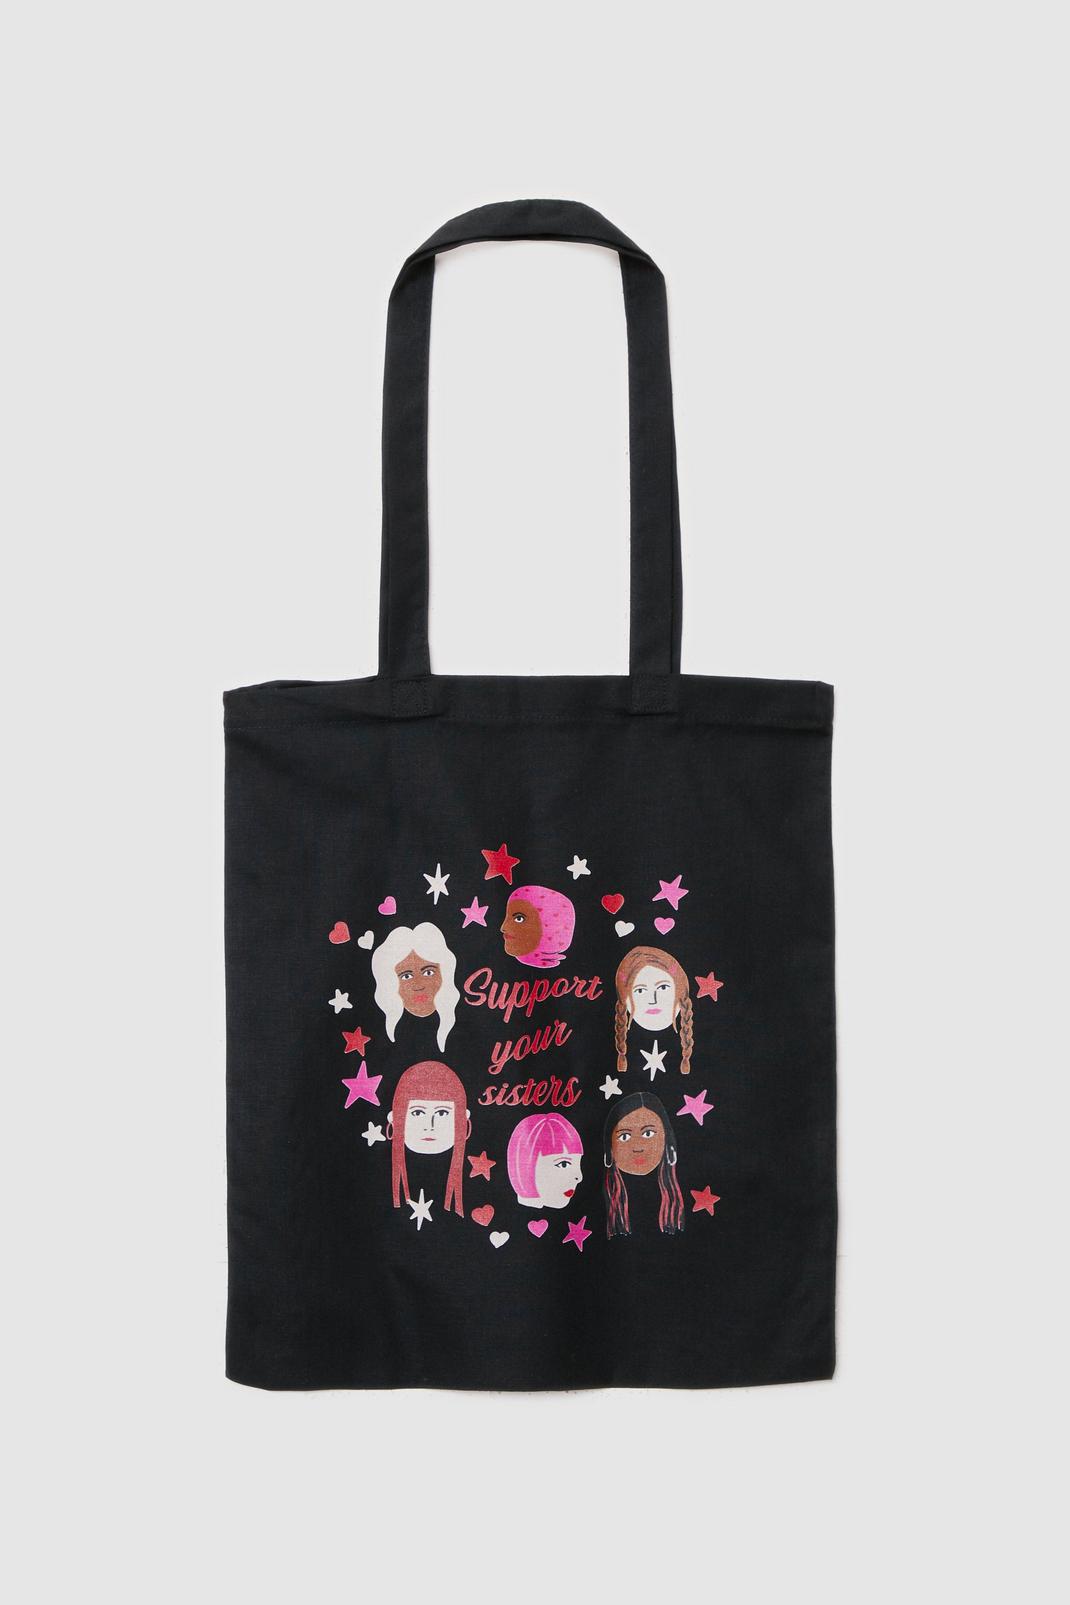 Support Your Sisters Graphic Tote Bag image number 1